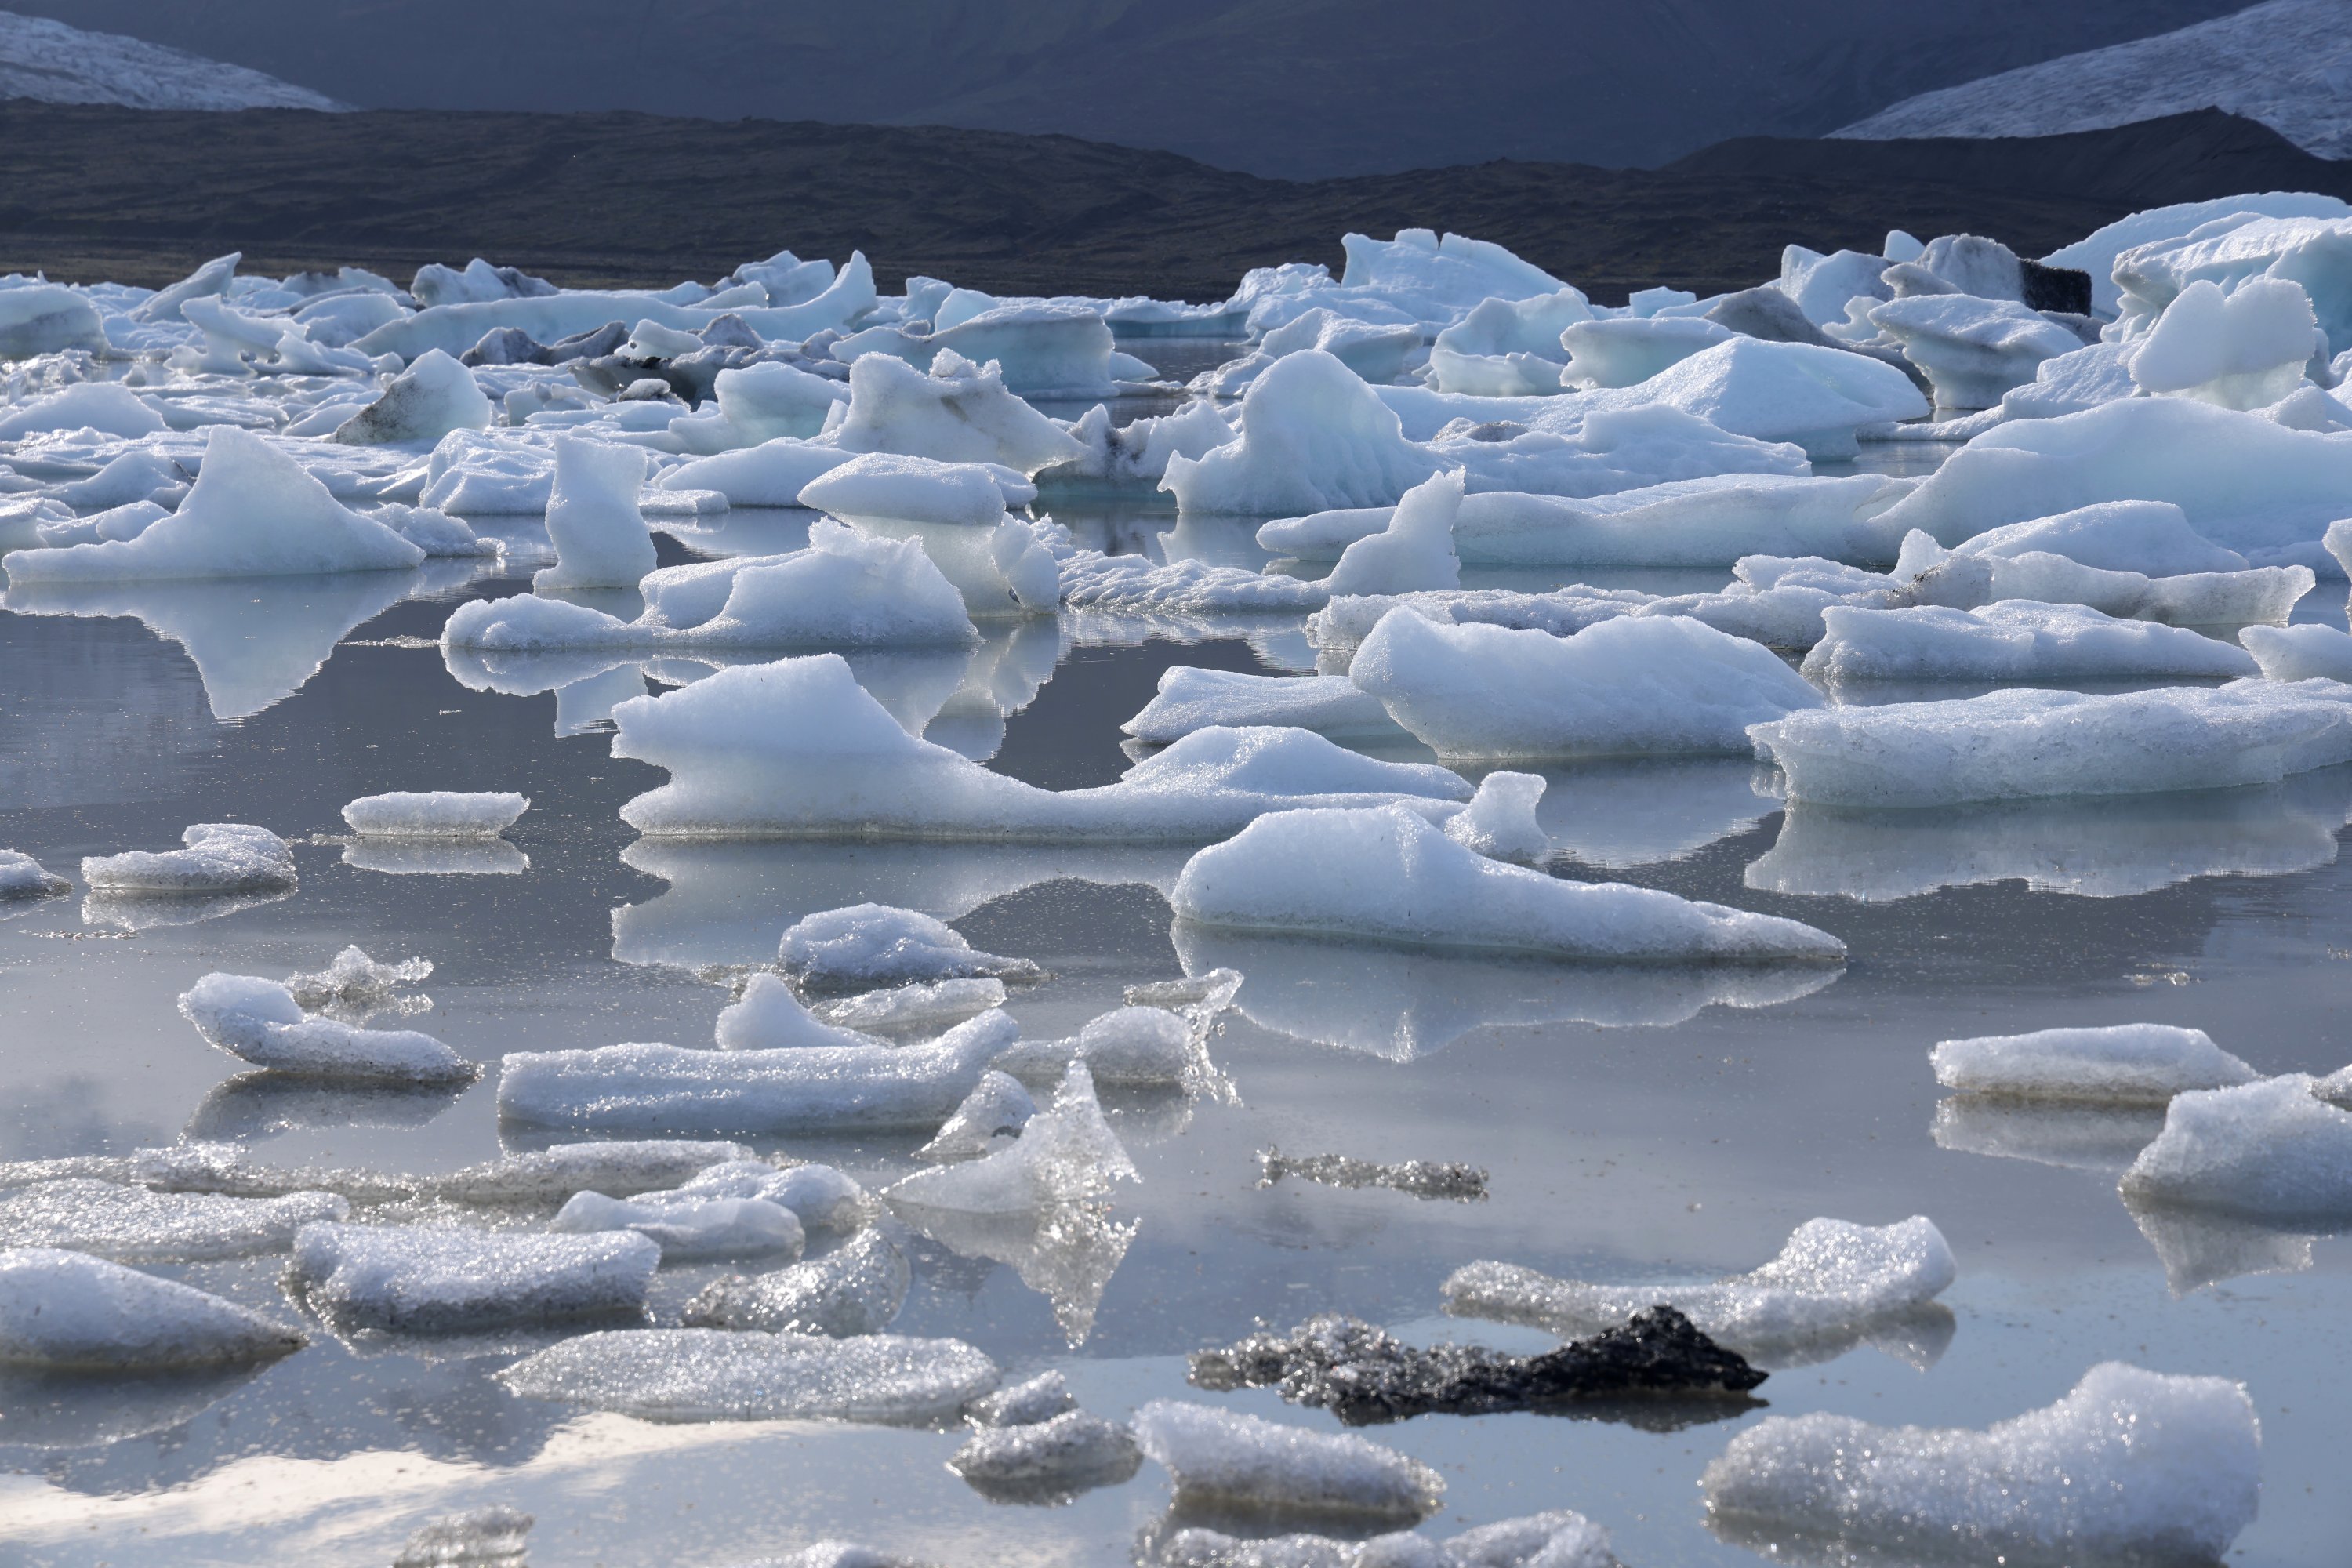 Chunks of ice have fallen off Fjallsjokull glacier in a process called calving float on Fjallsarlon lake, near Hof, Iceland, Aug. 14, 2021. (Photo by Getty Images)